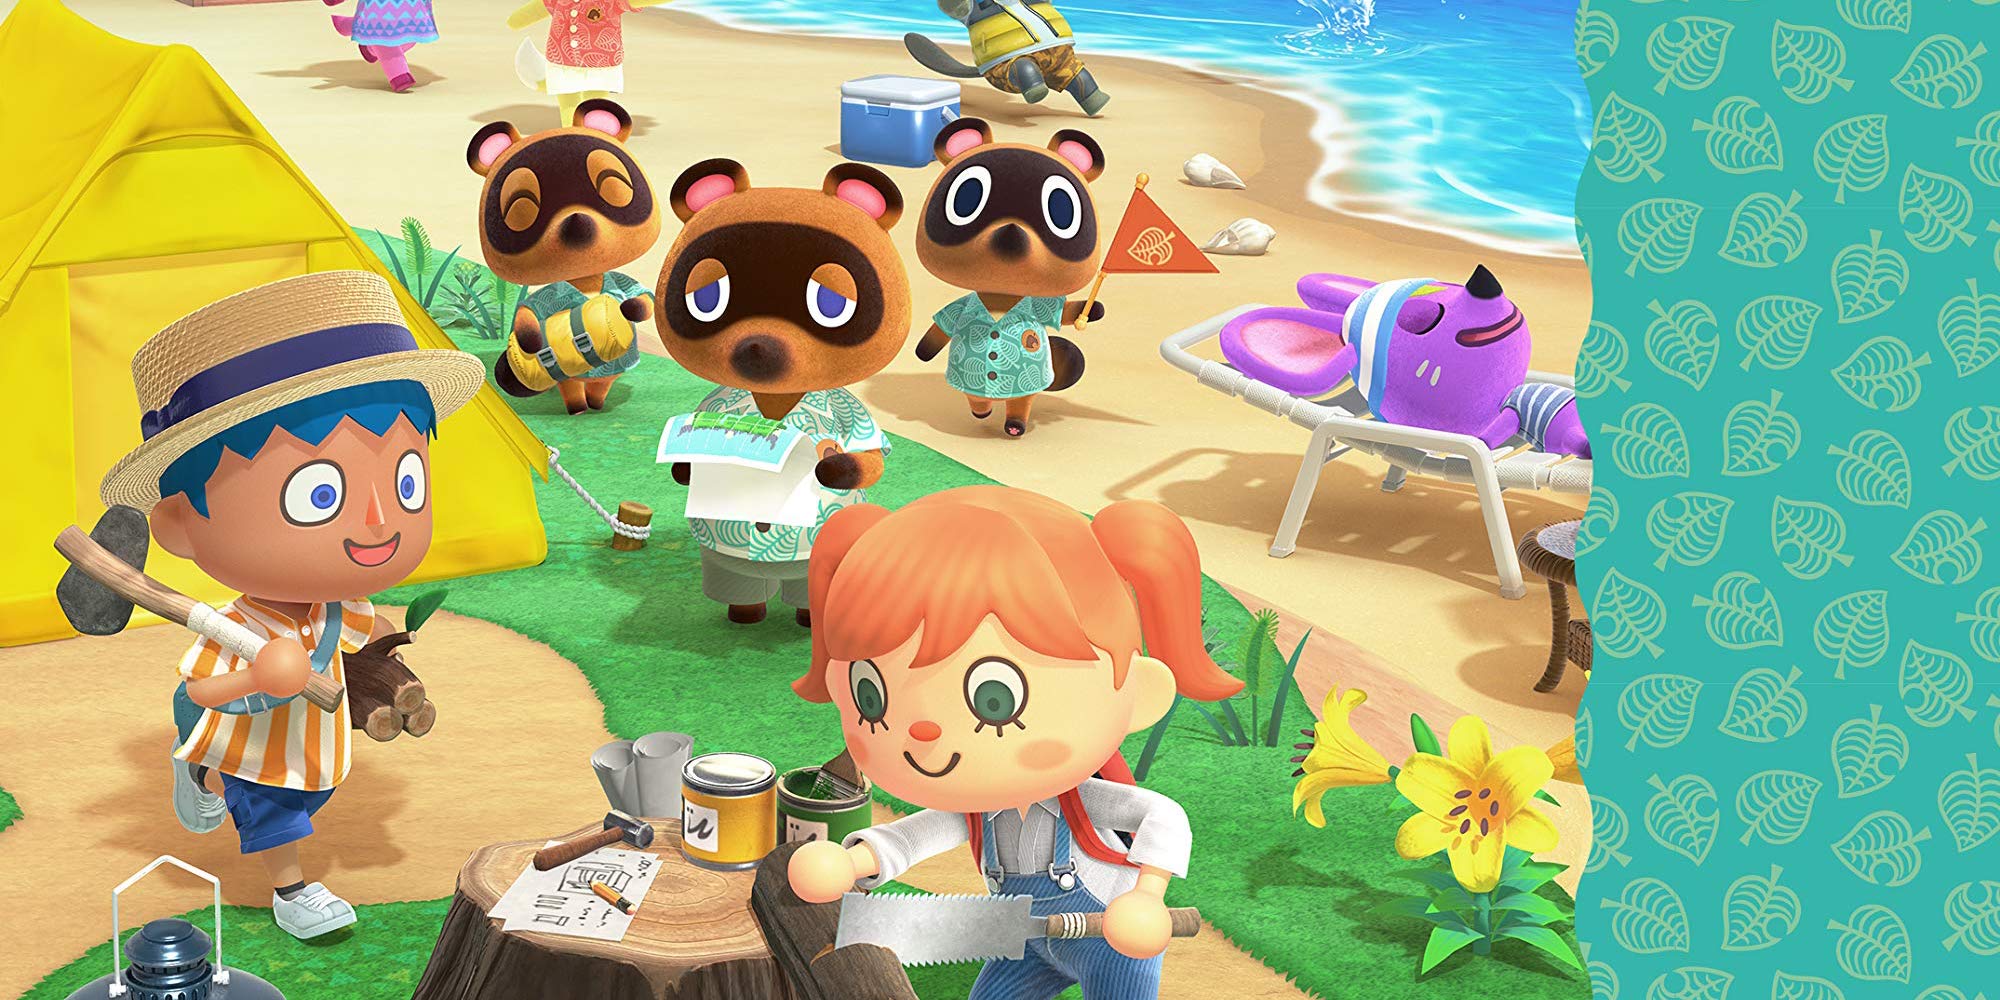 animal crossing new horizons official companion guide amazon